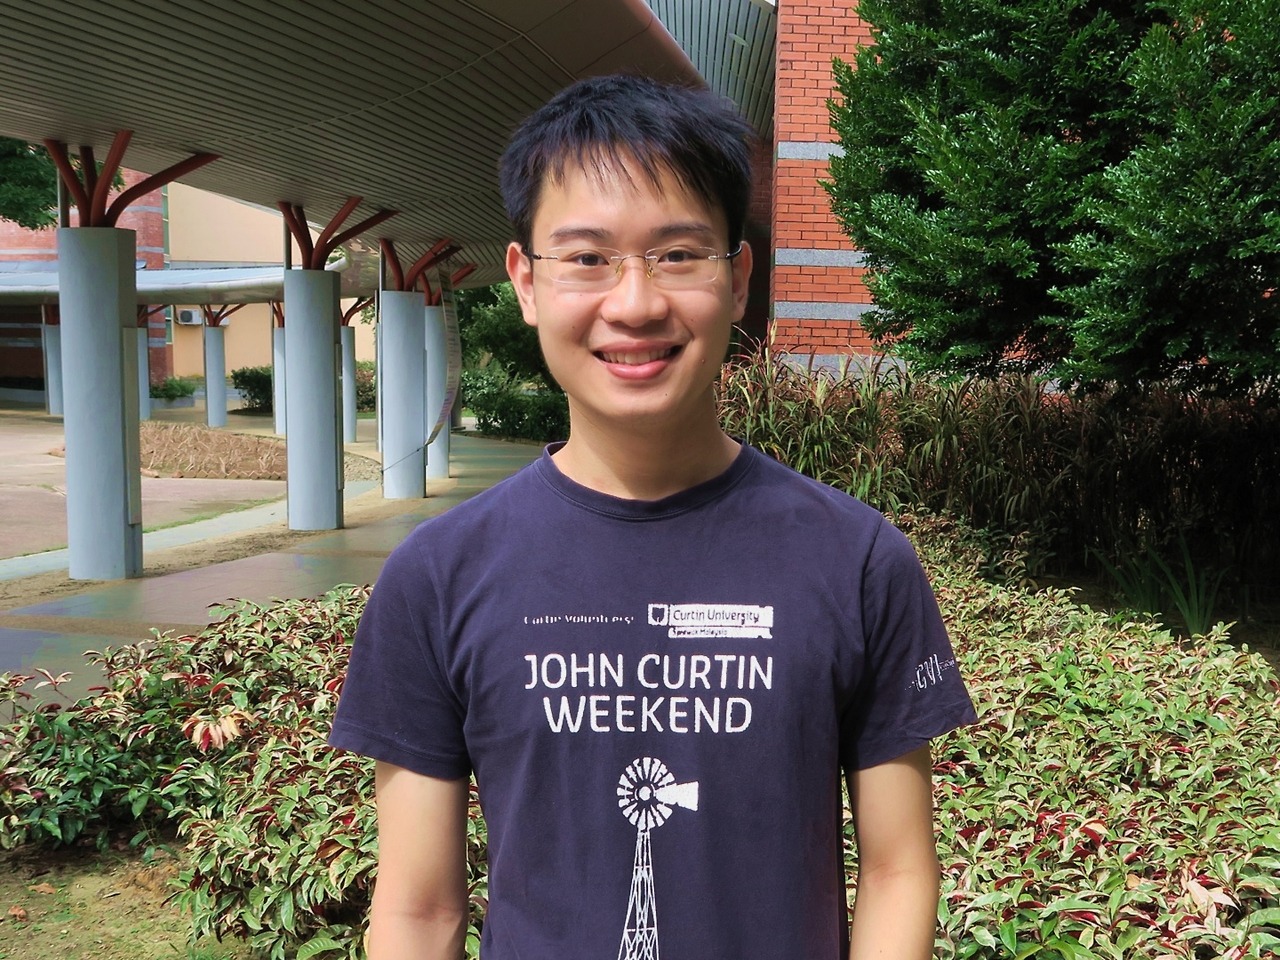 “I’m taking a Bachelor of Technology majoring in computer science and networking. I have always been interested in computers and networking which is the main reason I selected the course. I chose Curtin Malaysia because it not only offers the course...